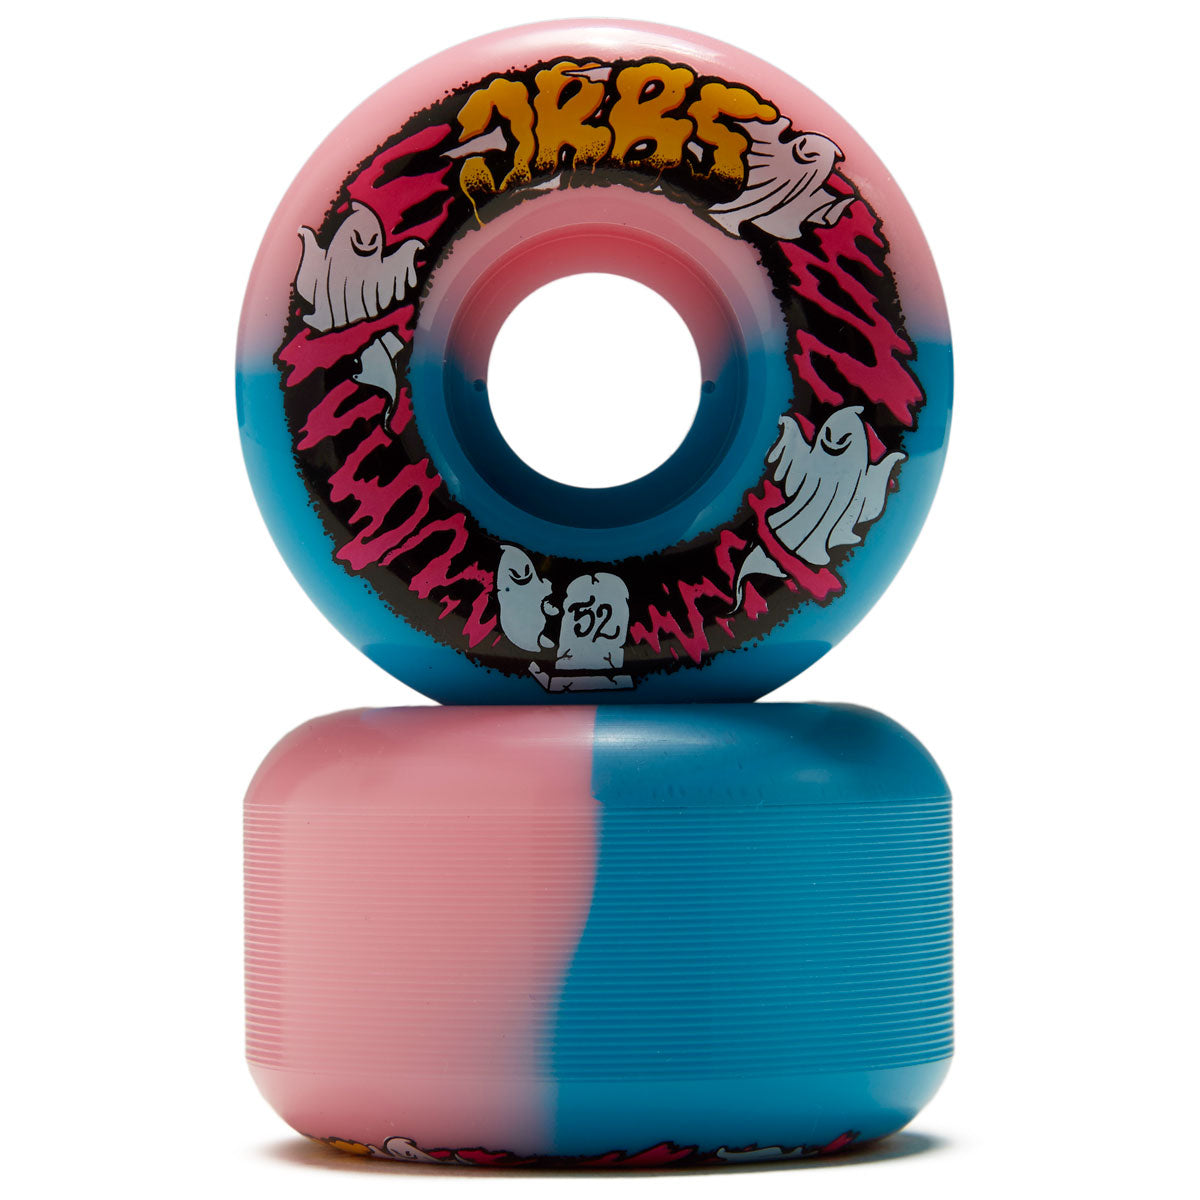 Welcome Orbs Apparitions '23 Round 99A Skateboard Wheels - Pink/Blue Split - 52mm image 2